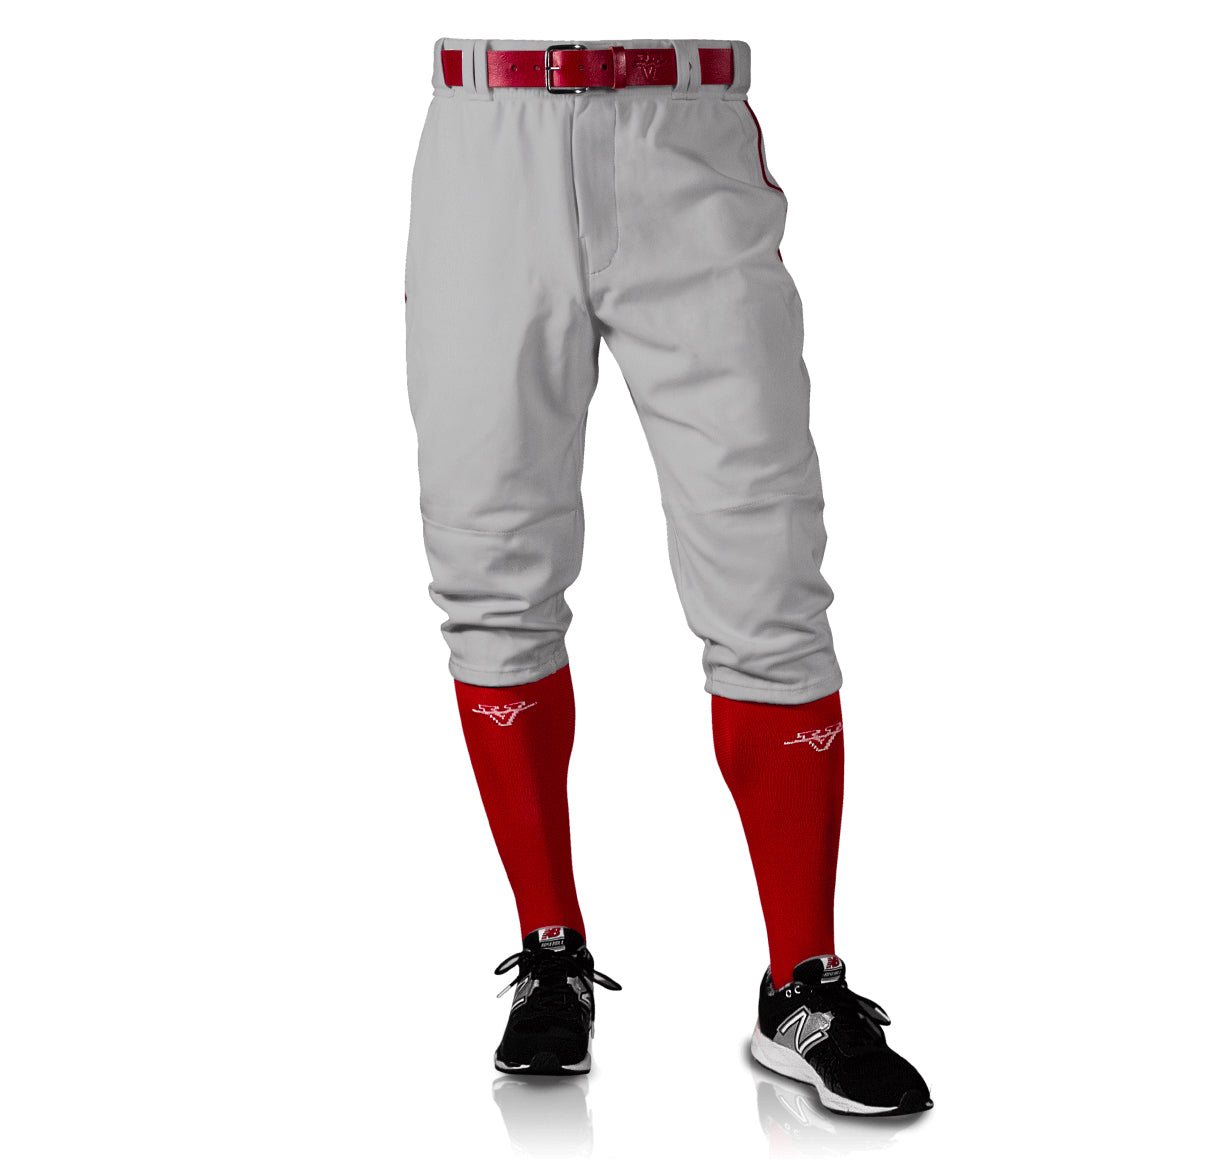 Launch Series Game/Practice Baseball Pant, Adult, Piped, Knicker,  Grey/Royal, Large : Amazon.in: Clothing & Accessories